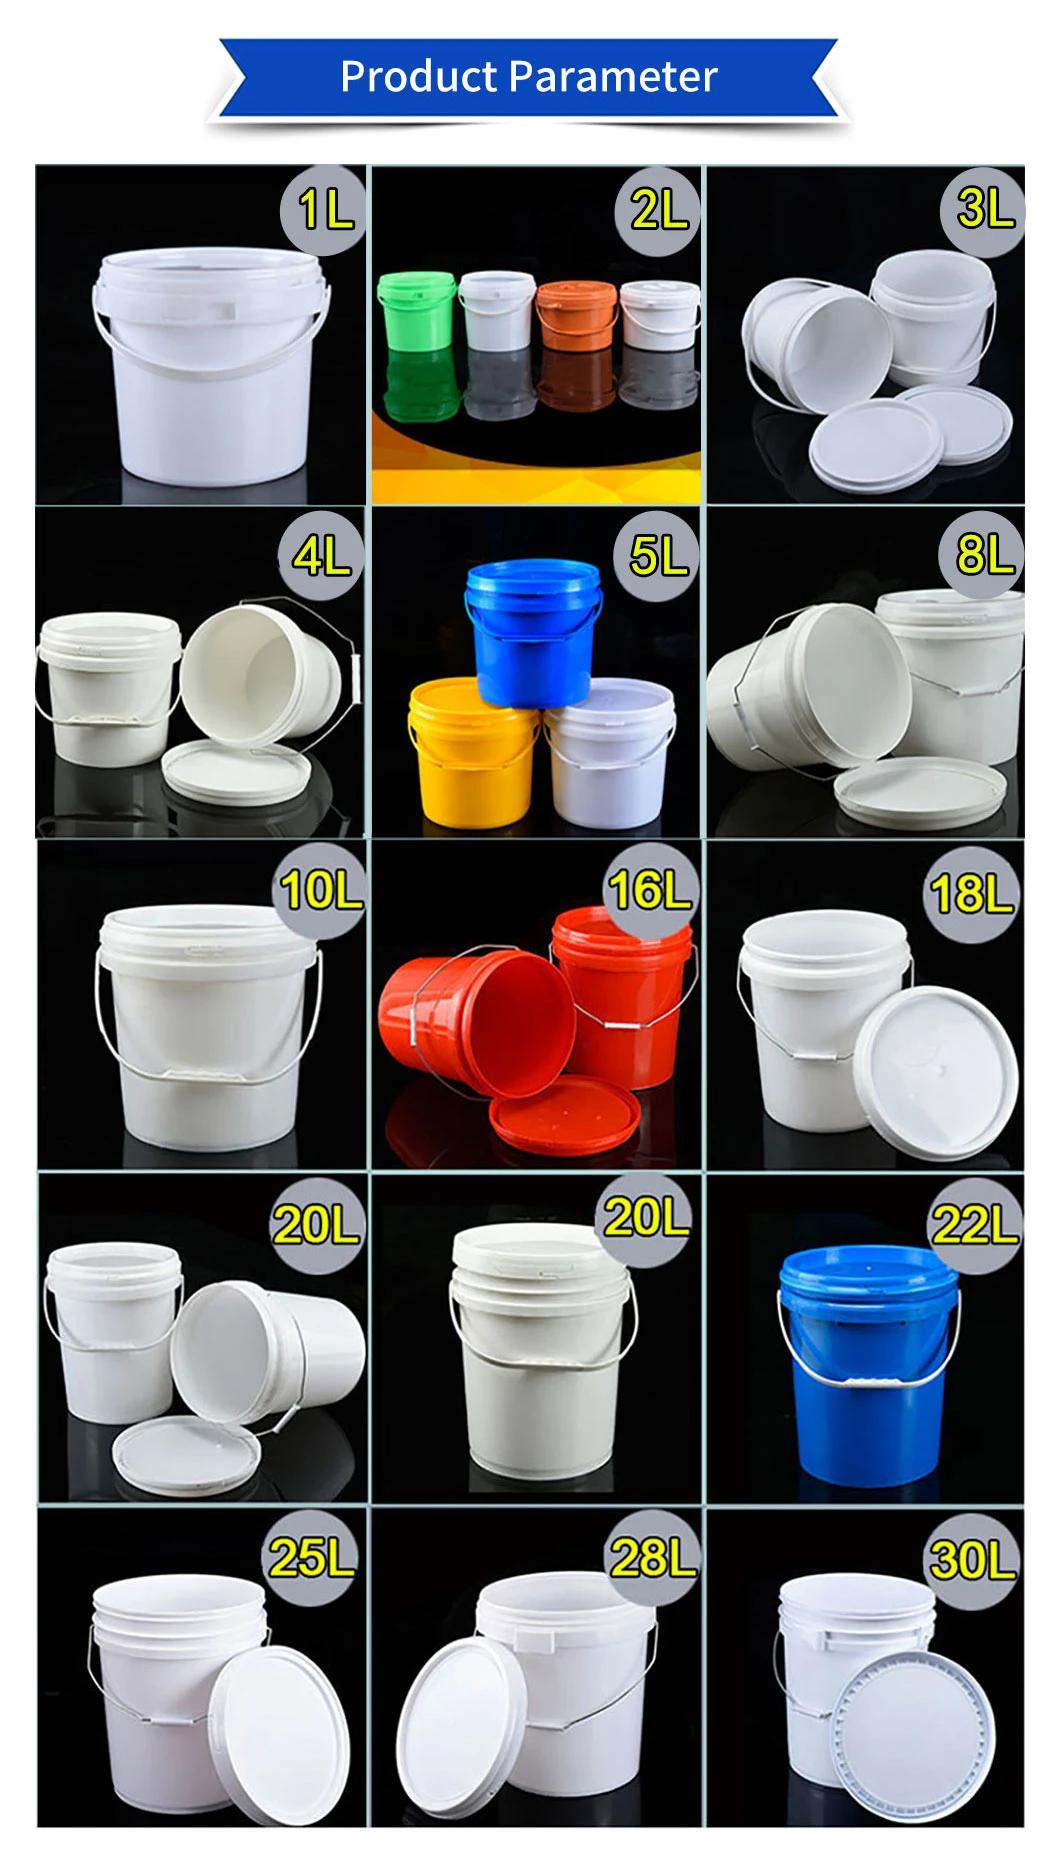 Heavy Duty 30L Screw Lid PP Bucket with Metal Handle and Lid